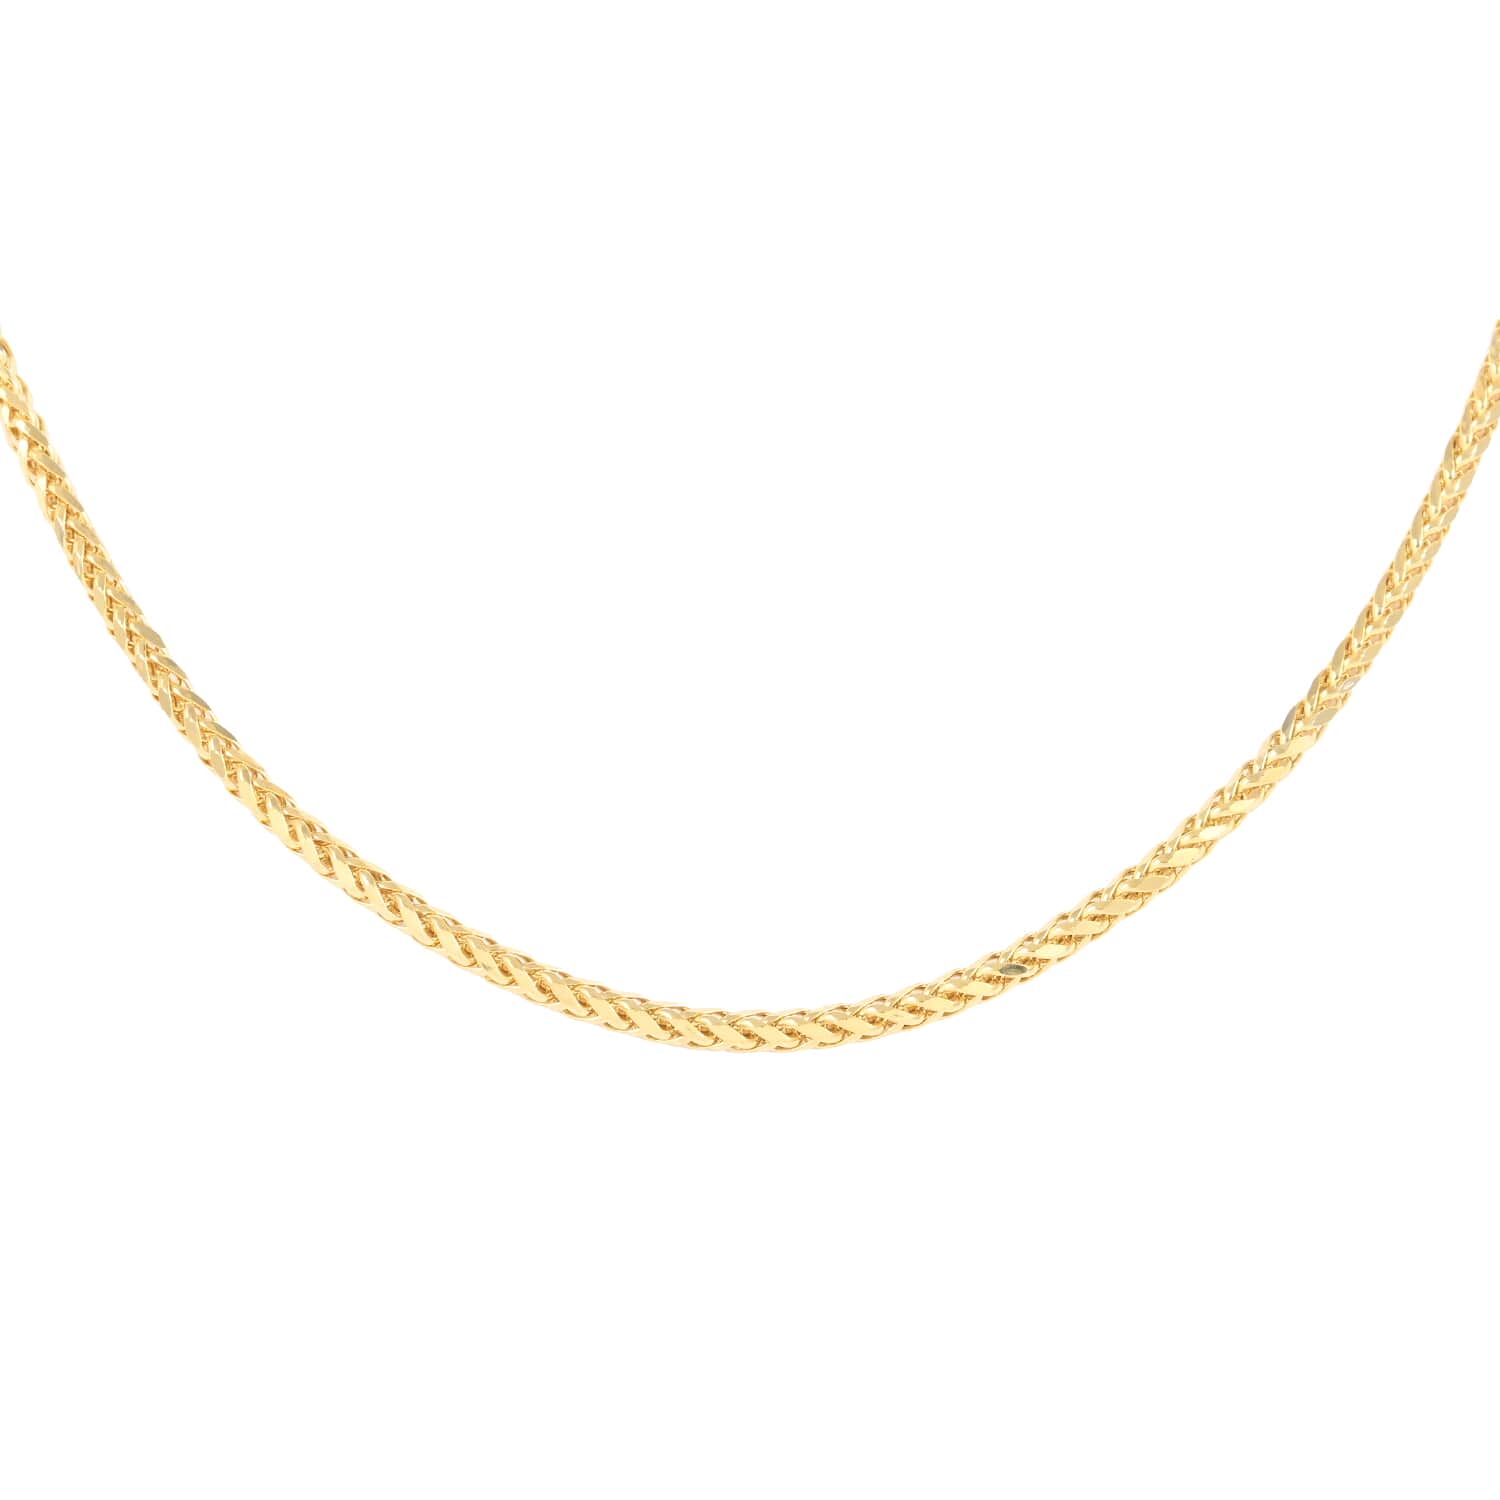 Buy California Closeout Deal 10K Yellow Gold 3mm Palma Necklace 30